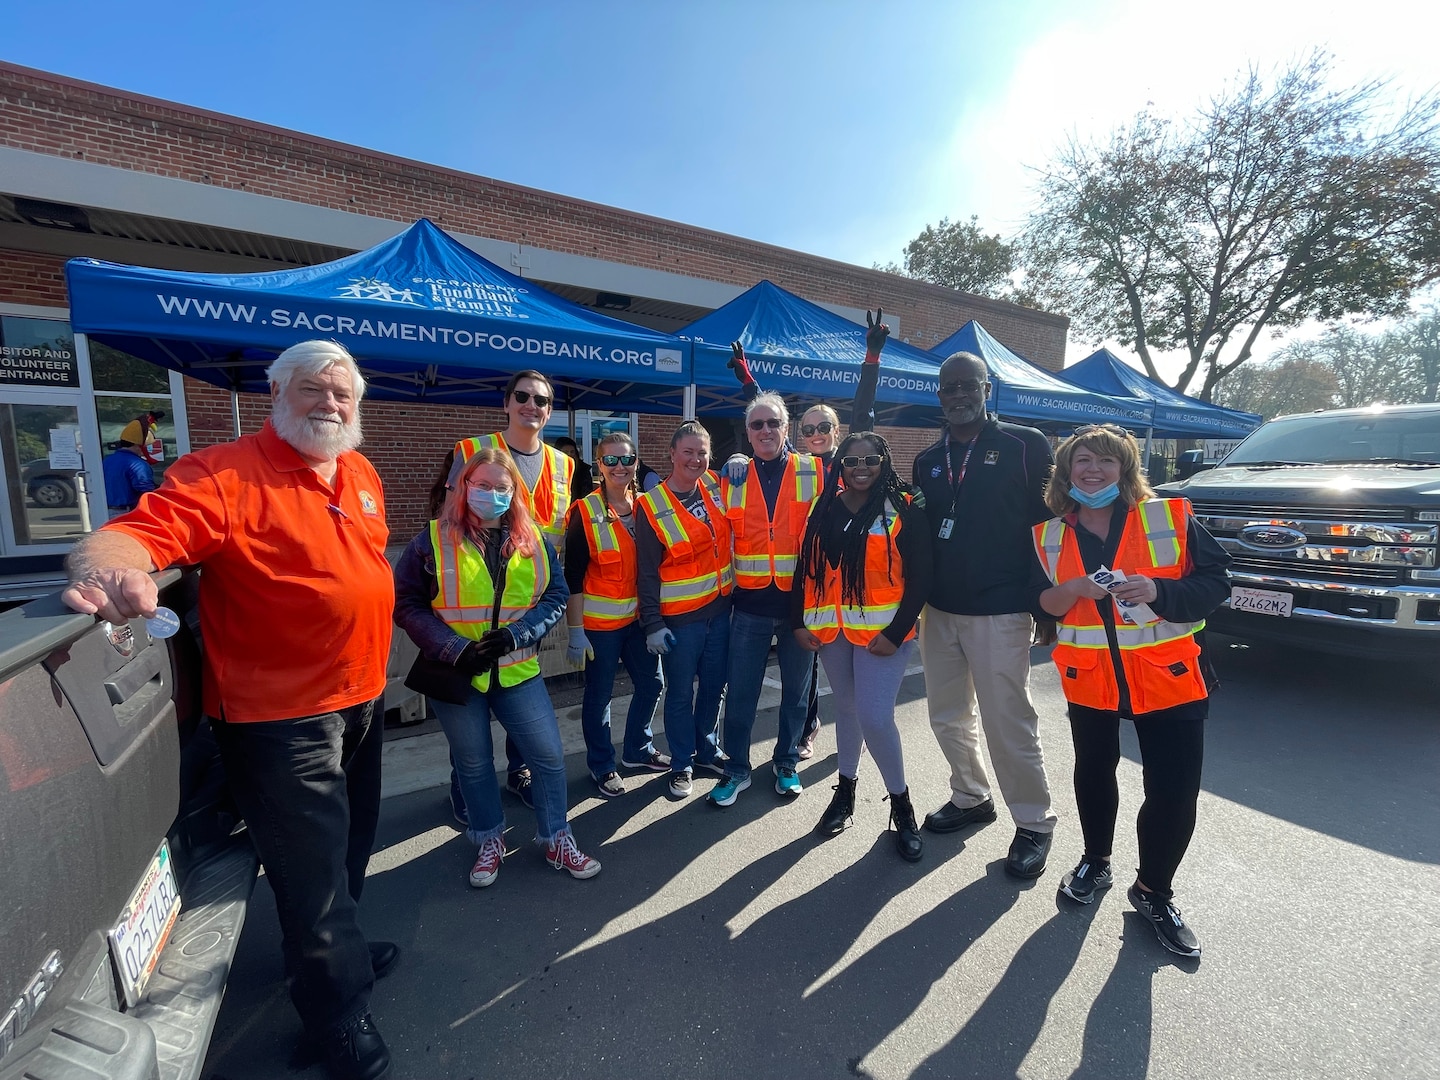 William D. King (processing supervisor), left,  and Wallace A. Oliver (human resources assistant), second to right,  are pictured with volunteers from Sacramento Food Bank & Family Services during the turkey drive on Nov. 12, 2021